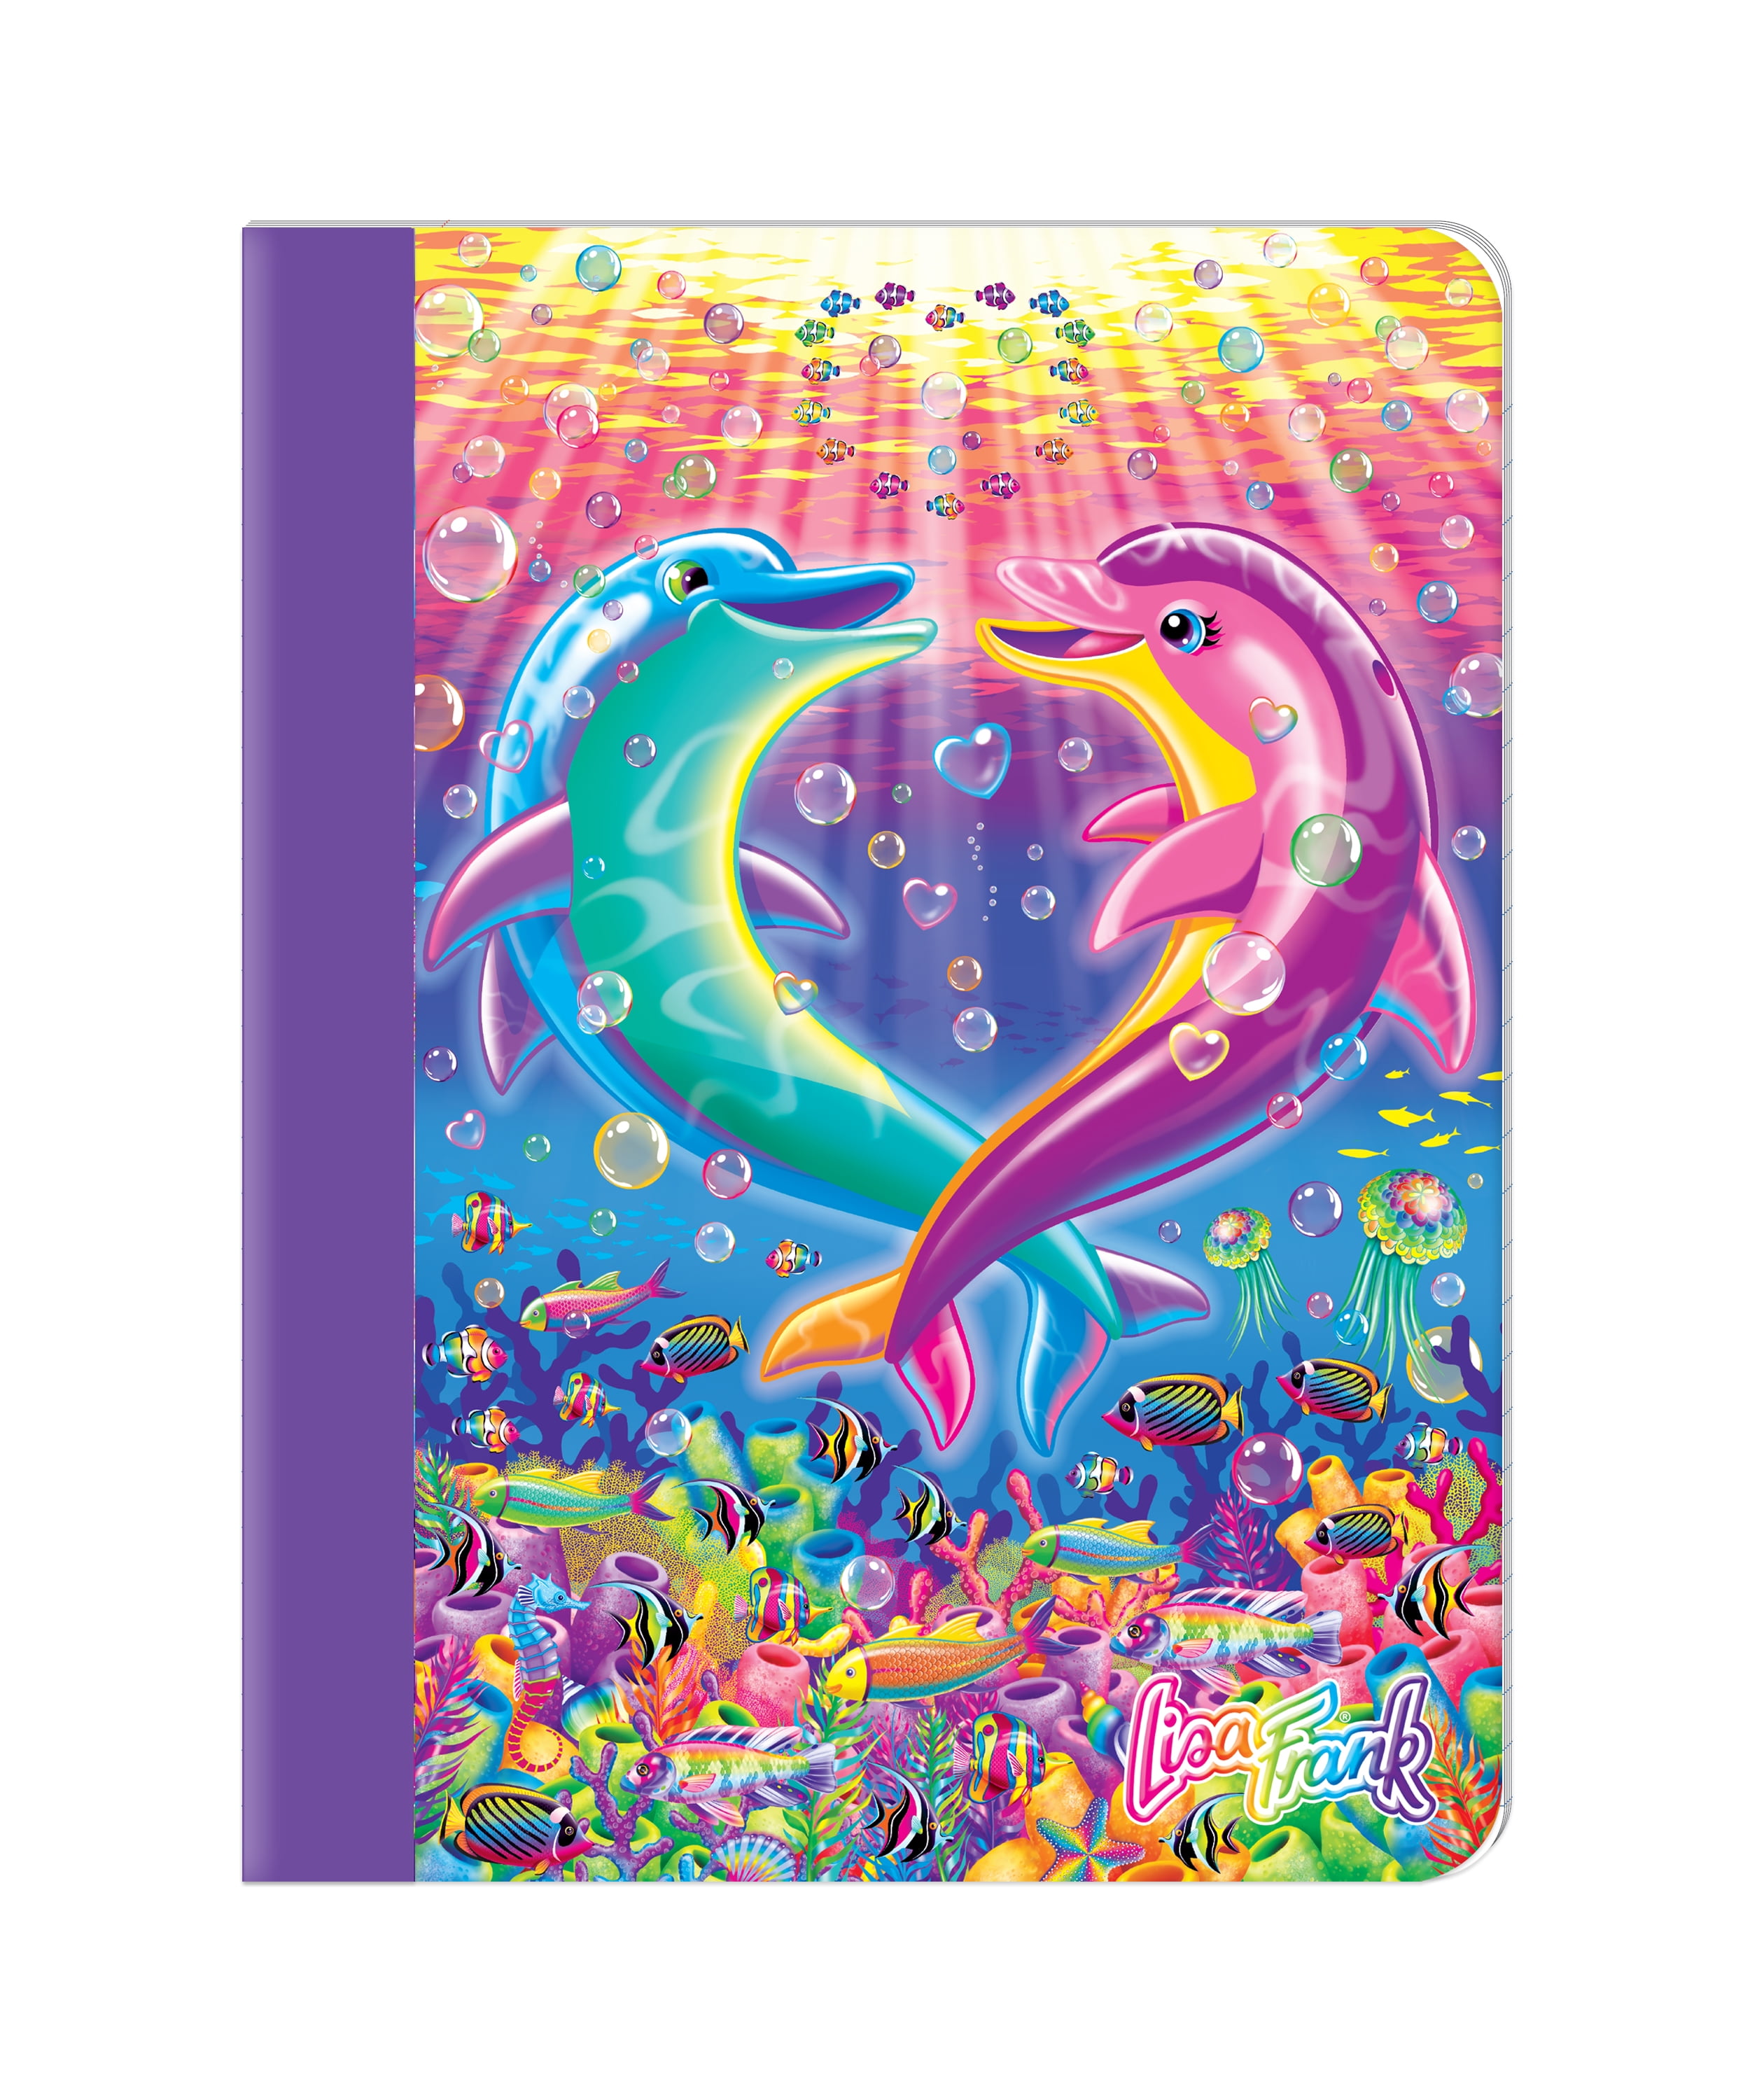 Yea, I Have a Lisa Frank Notebook Collection by SugarSpike on